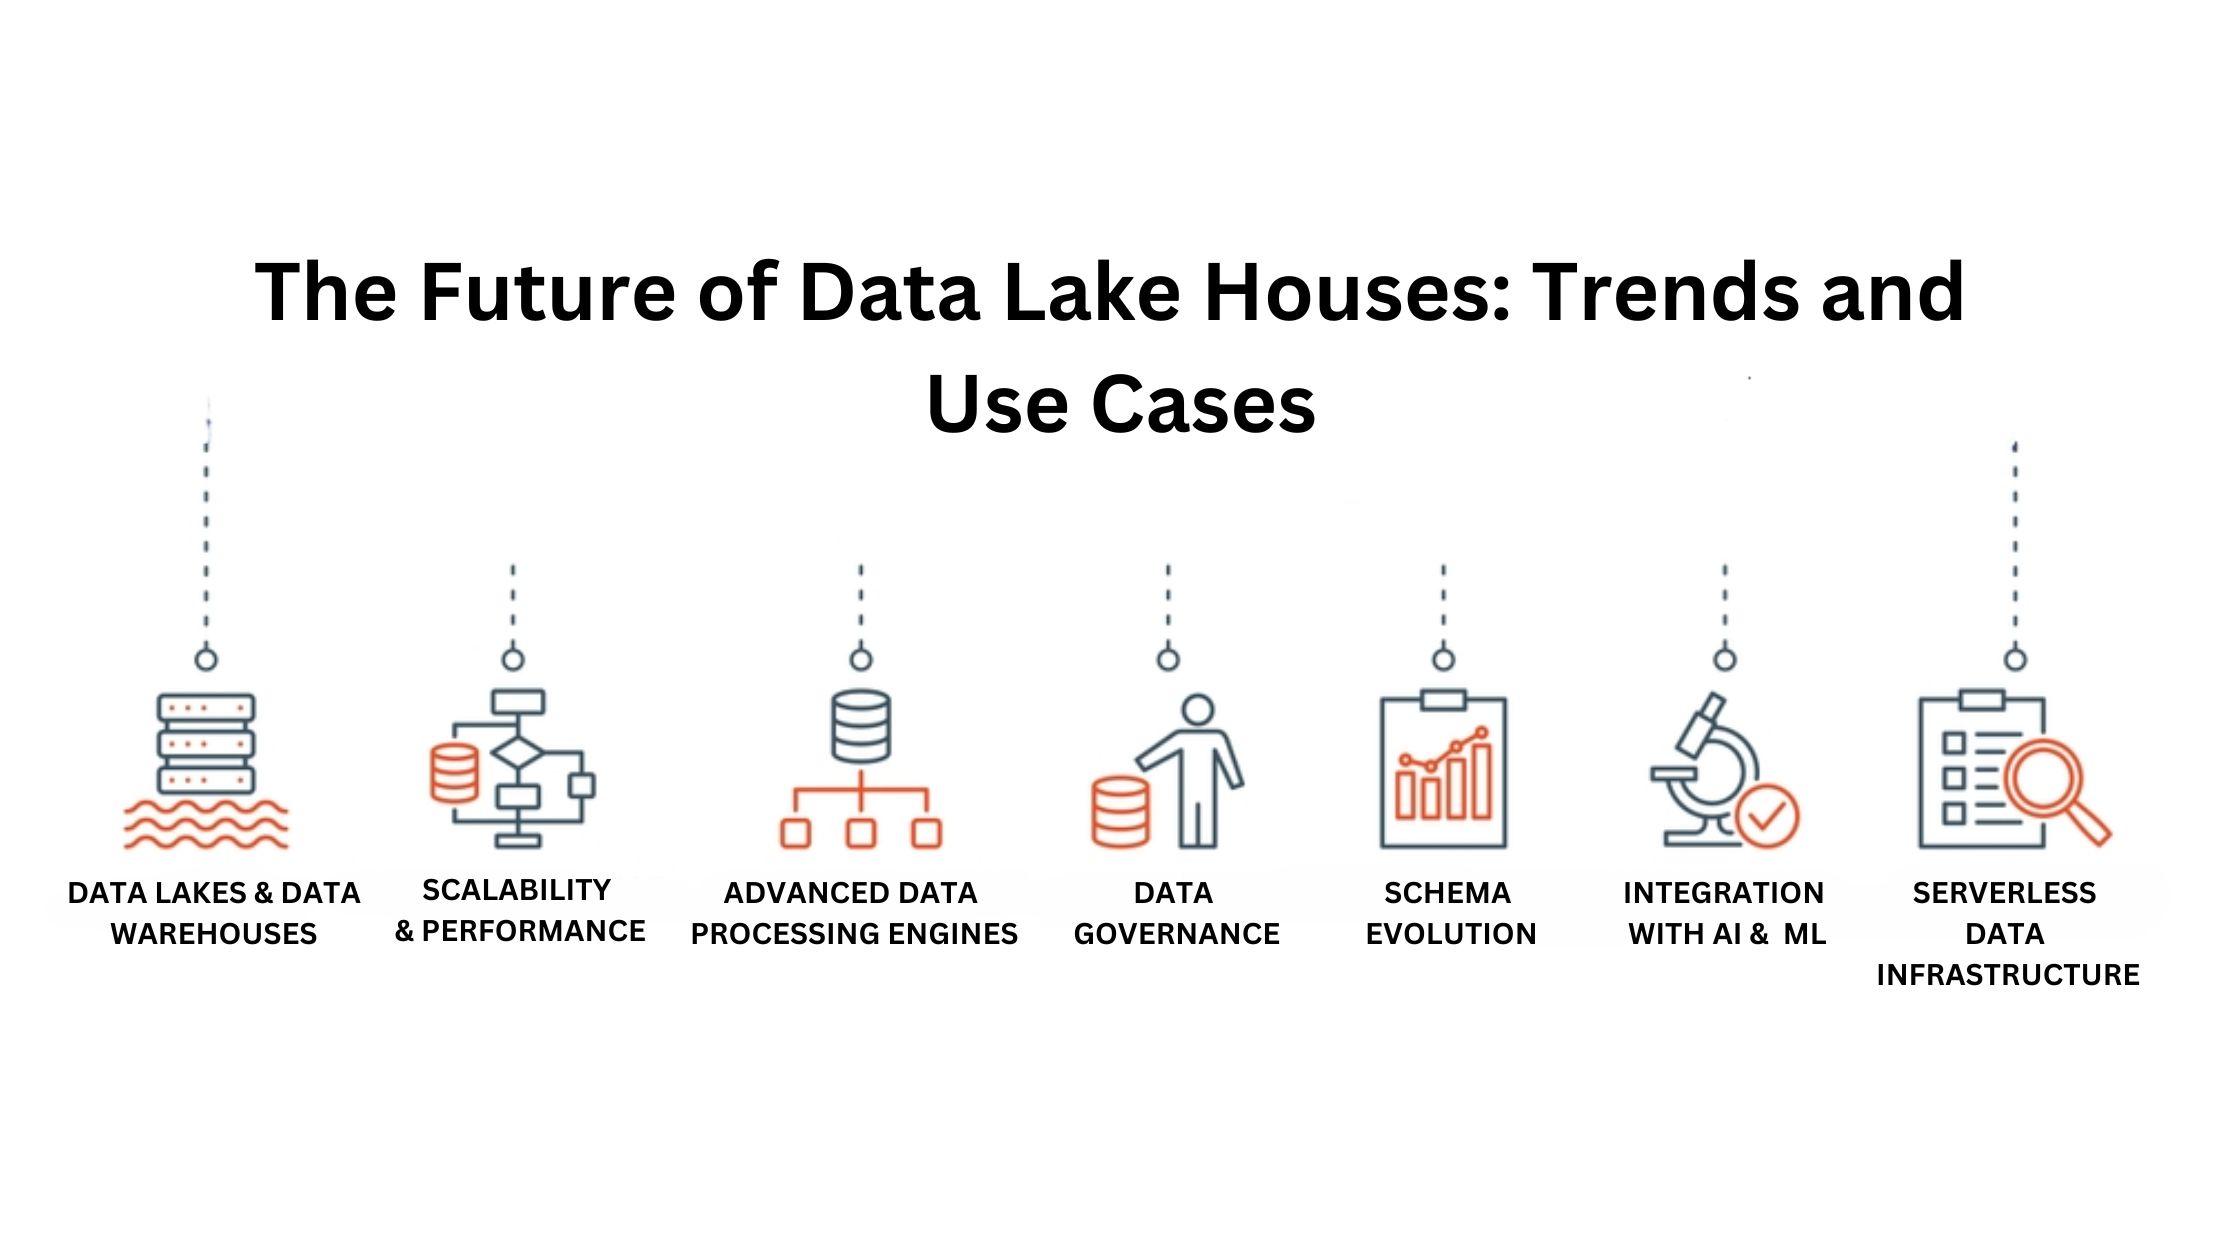 The Future of Data Lake Houses: Trends and Use Cases